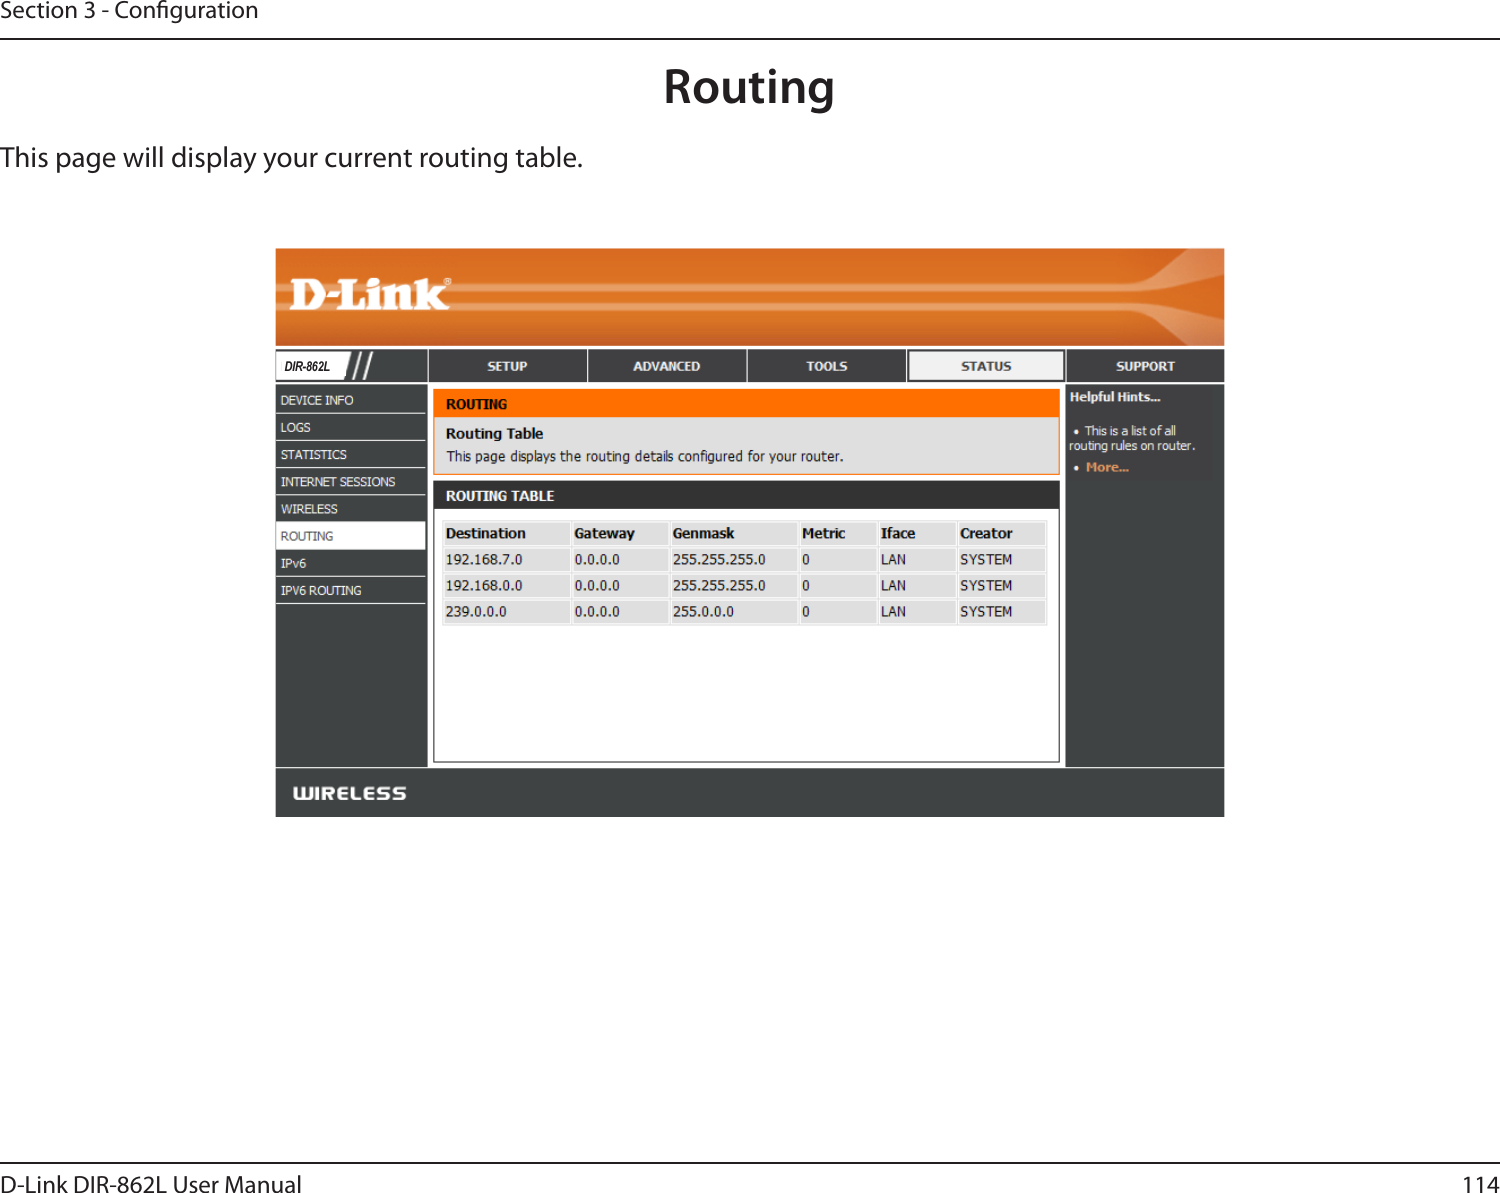 114D-Link DIR-862L User ManualSection 3 - CongurationRoutingThis page will display your current routing table.DIR-862L